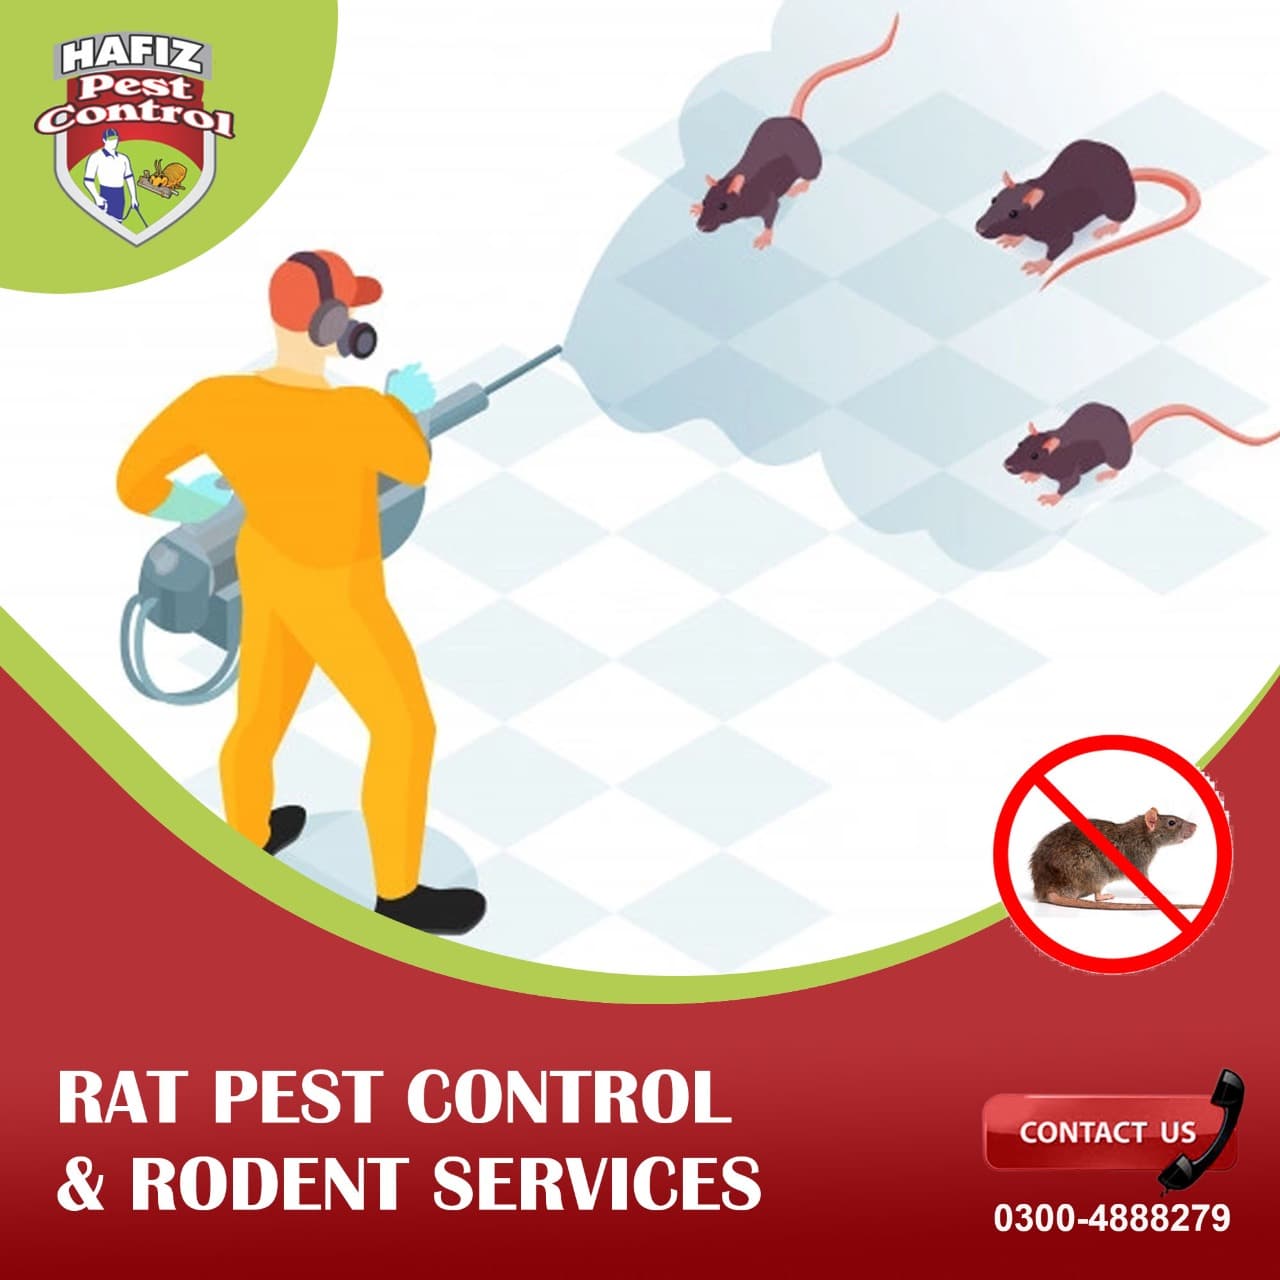 Rat Pest Control and Rodent Services Lahore